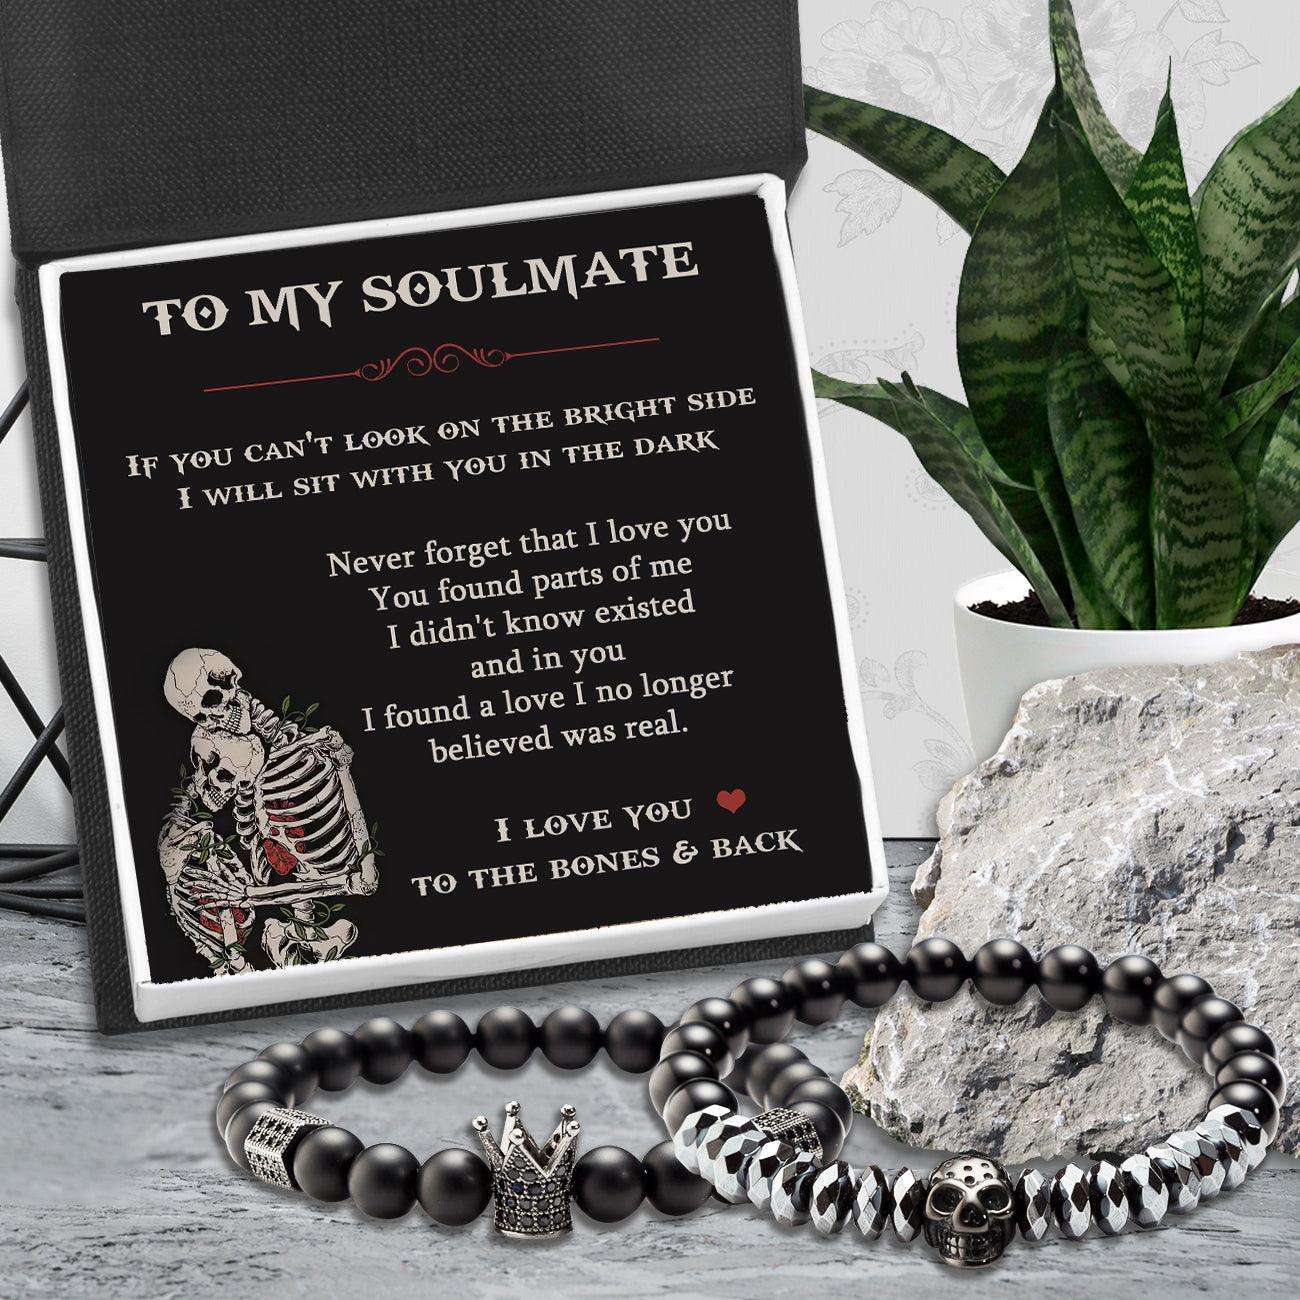 Couple Crown and Skull Bracelets - Skull - To My Soulmate - Never Forget That I Love You - Augbu13007 - Gifts Holder